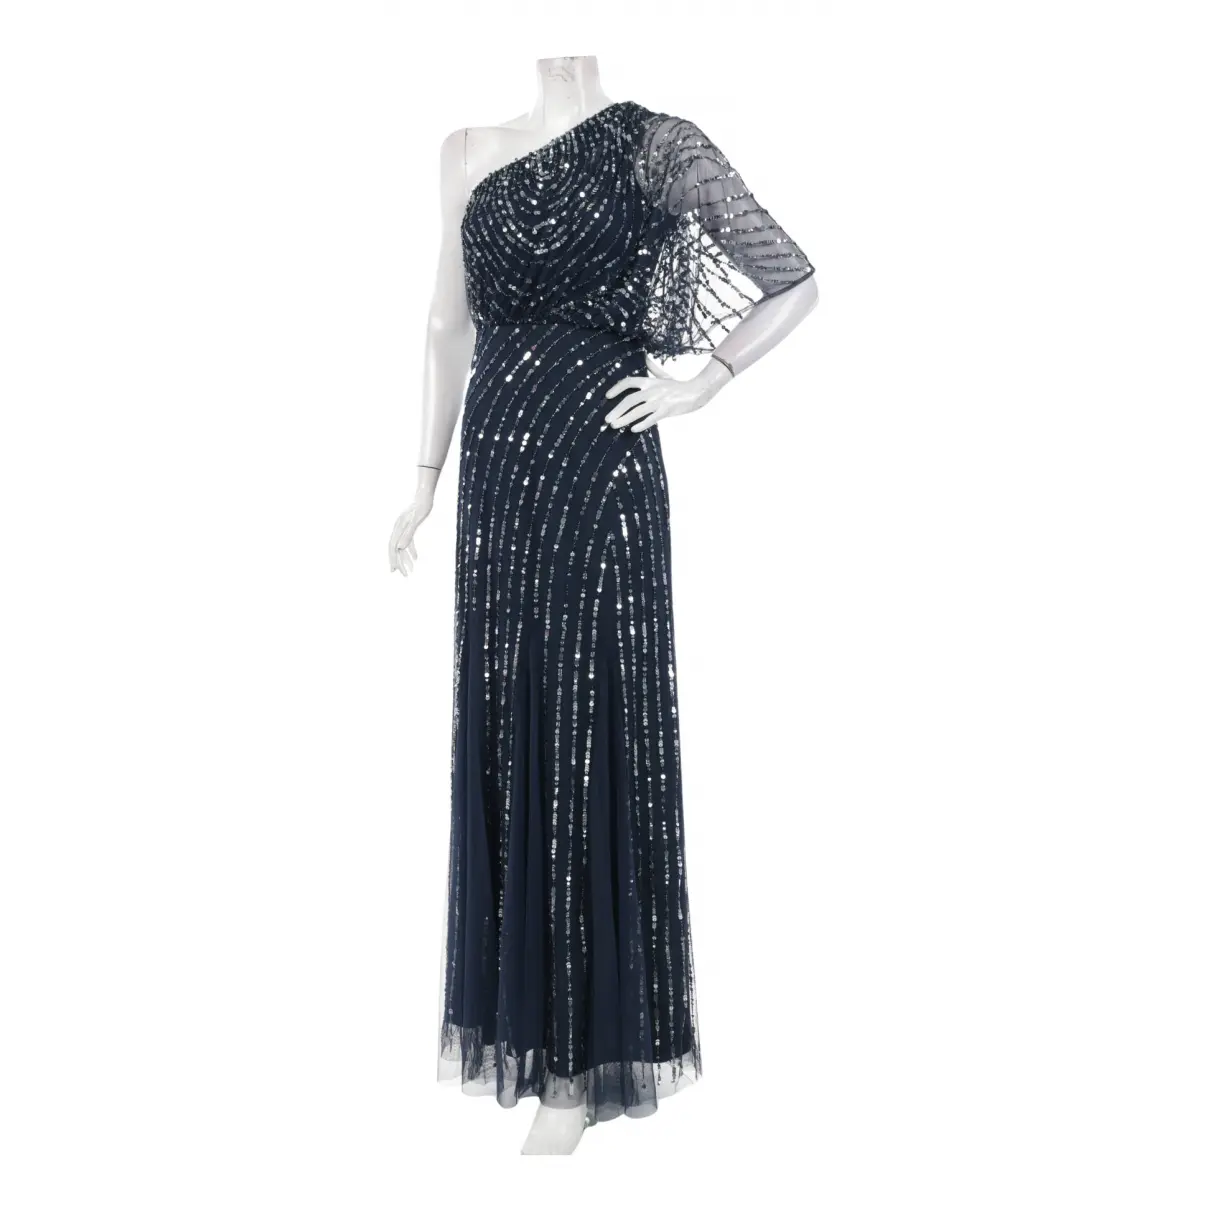 Maxi dress Lace and Beads